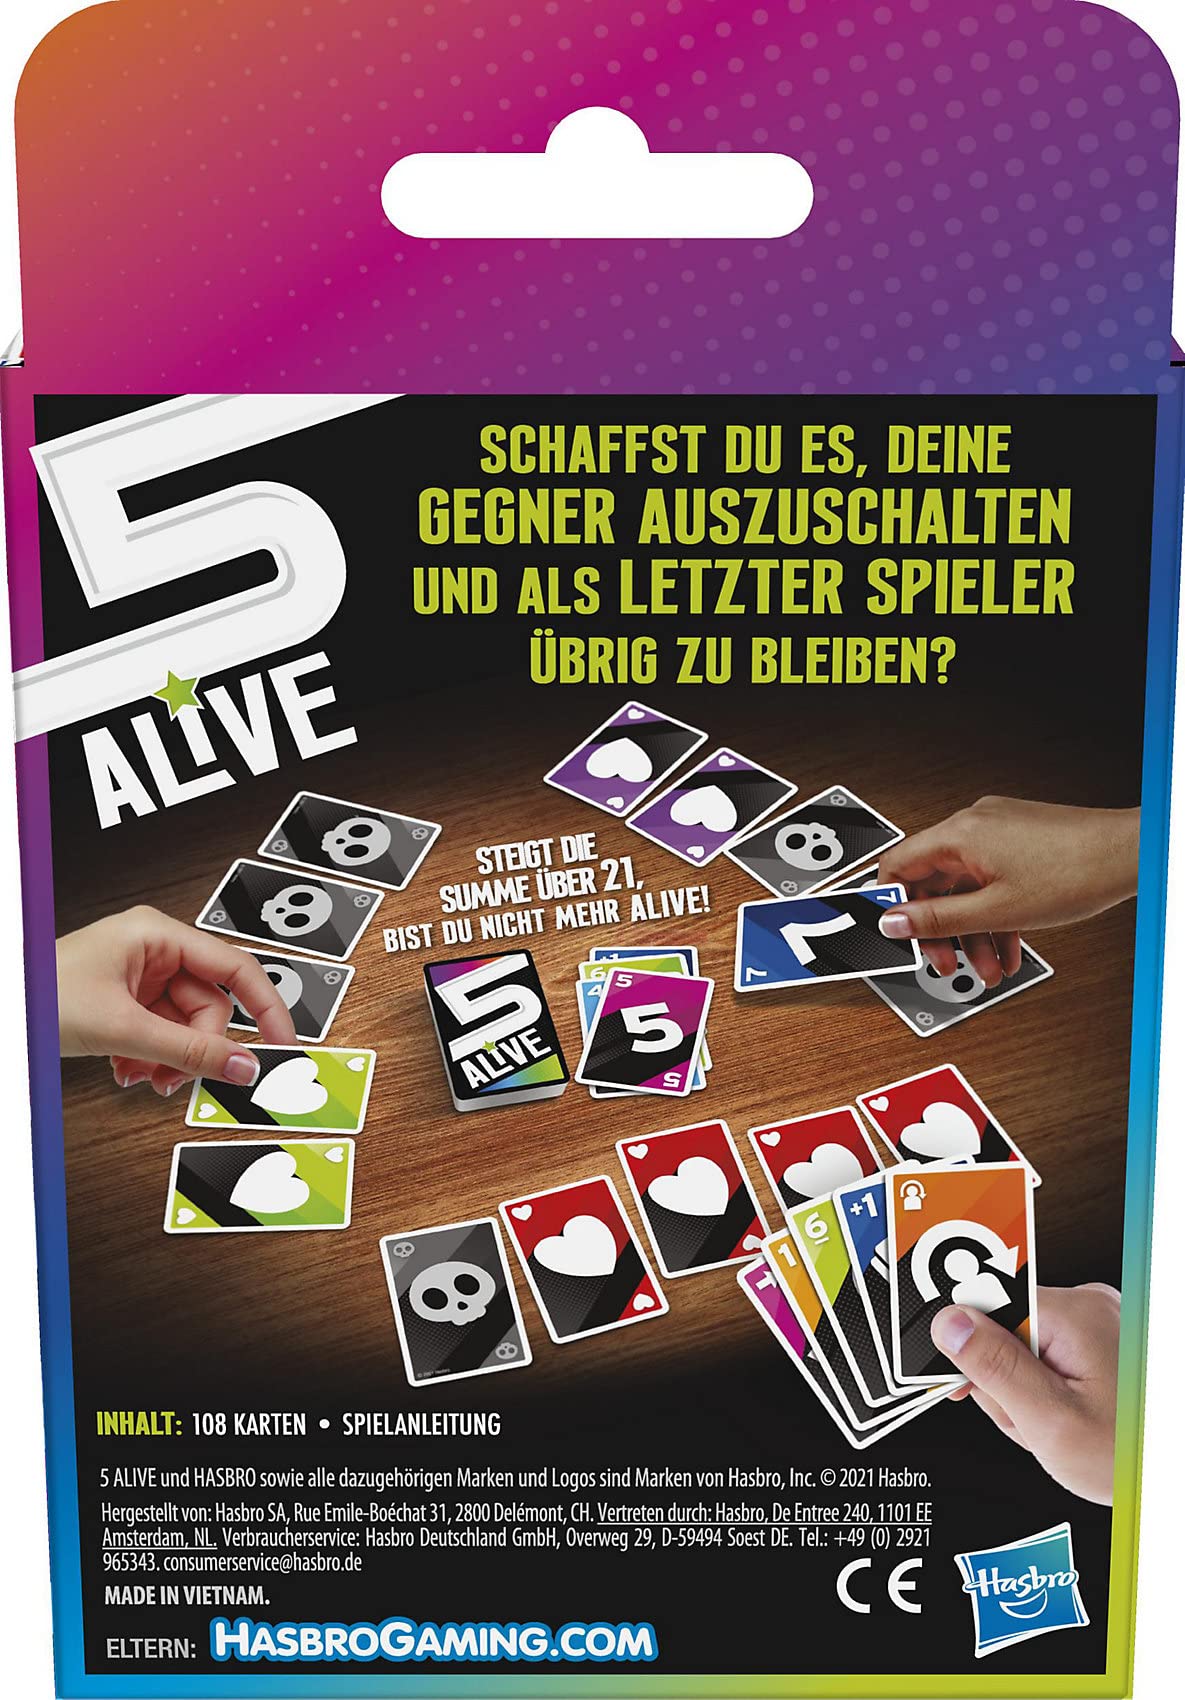 Disney Frozen Hasbro Five Alive Card Game, Quick Game for Kids and Families, Easy to Learn Family Game from 8 Years, 5 Alive Card Game for 2-6 Players